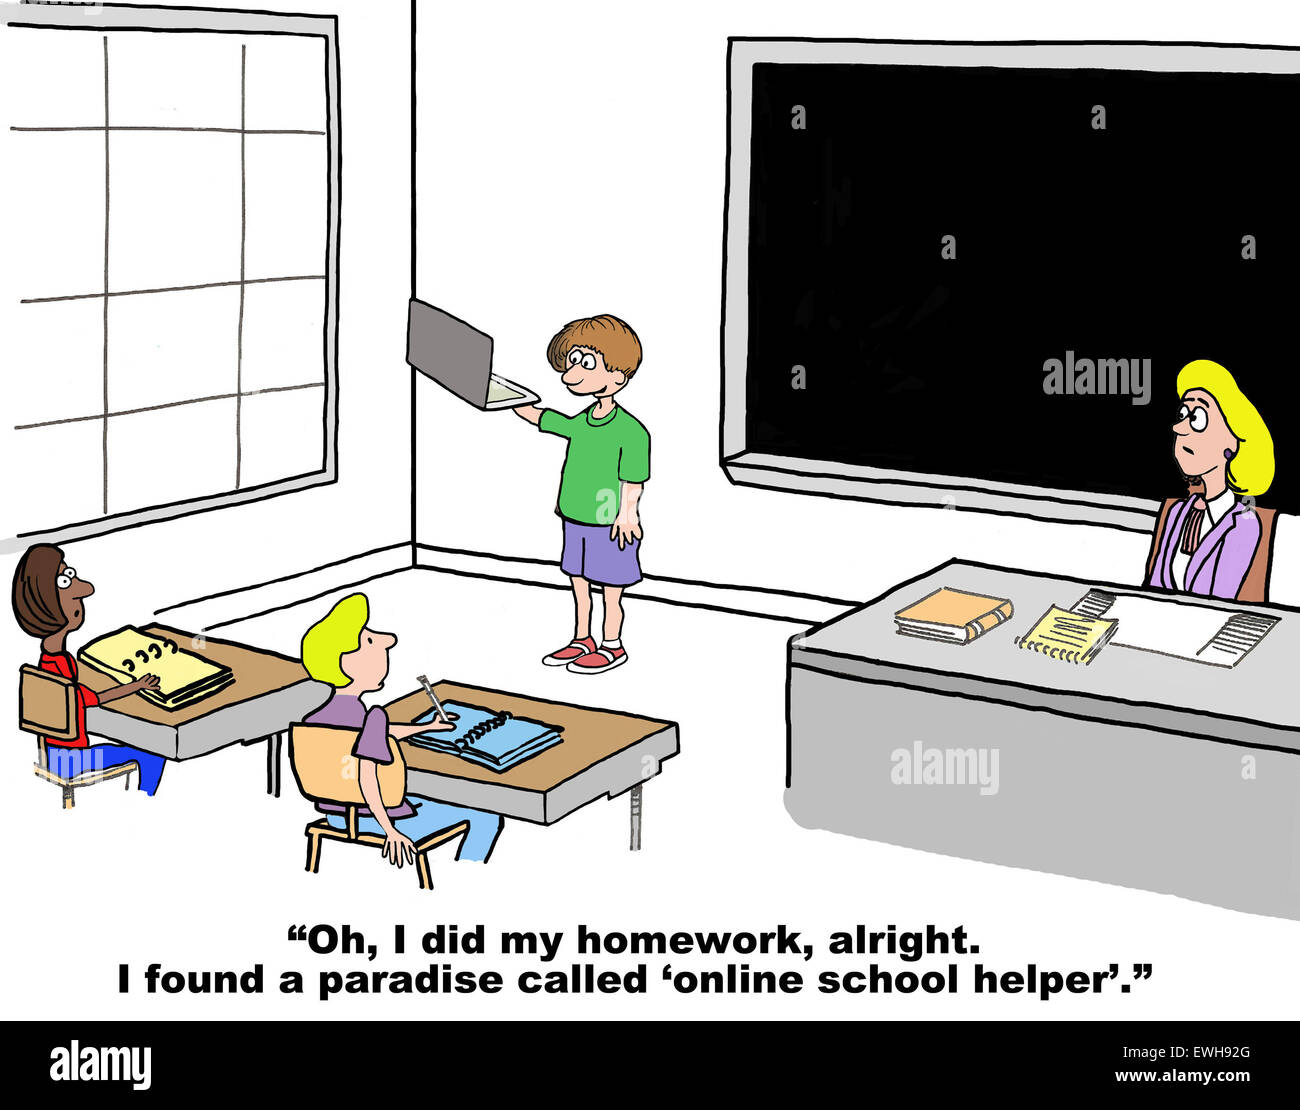 Education Cartoon Of A Student Holding A Tablet And Saying I Did My Homework A Paradise Called Online School Helper Stock Photo Alamy